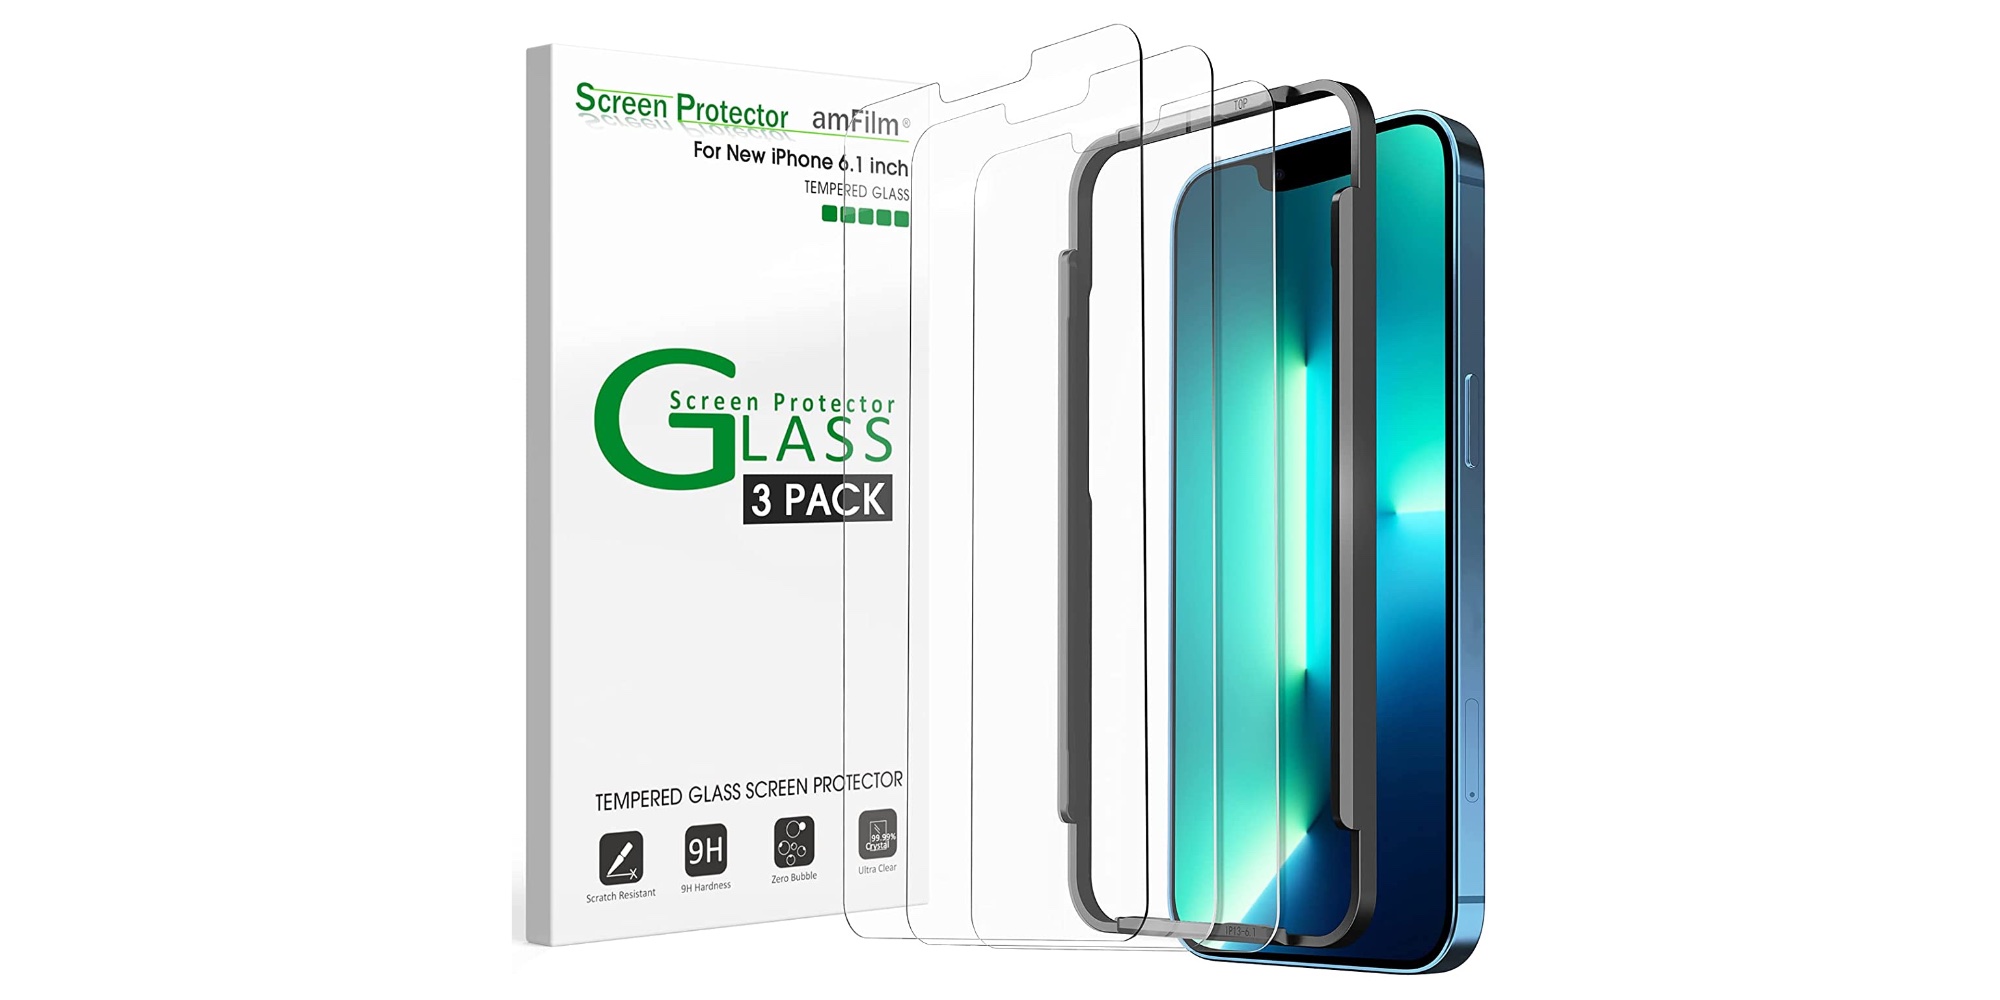 Spigen iPhone 13 cases and accessories launch from $14 - 9to5Toys